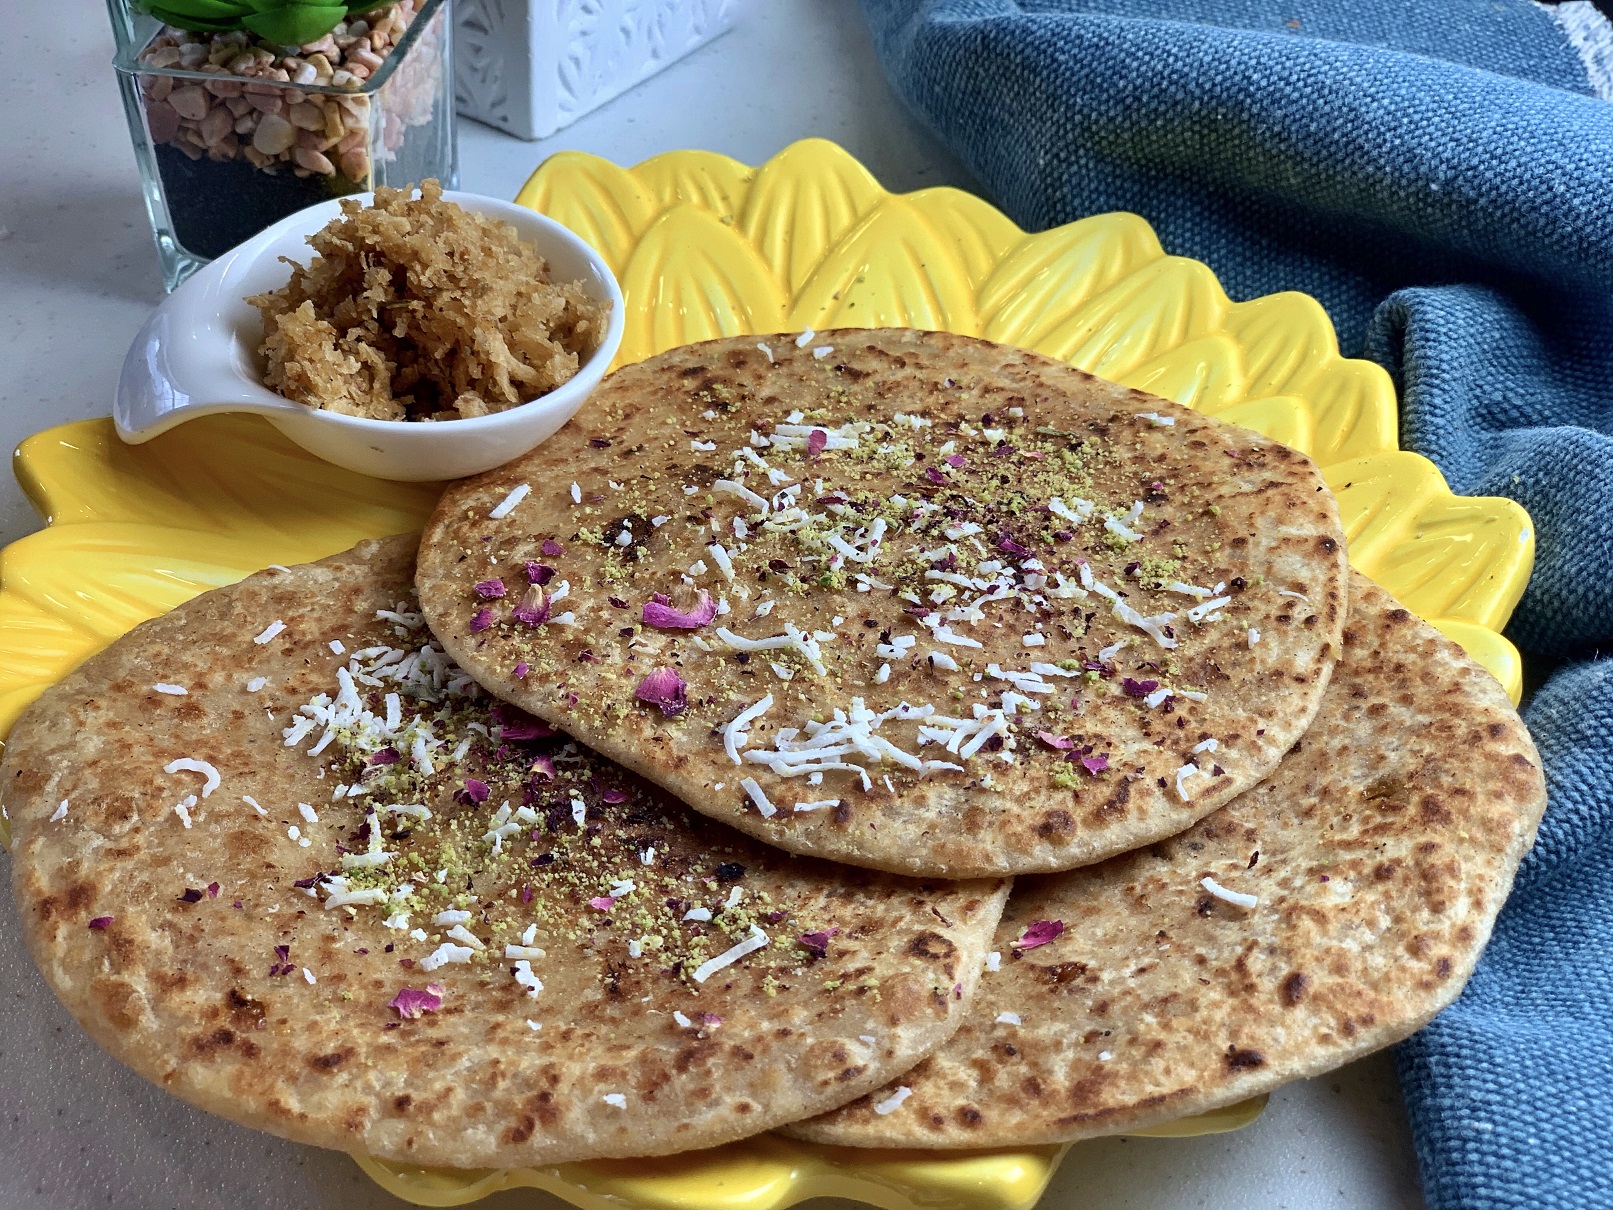 Coconut Jaggery Paratha (Nariyal Aur Gur Ka Paratha) - A quick fix for those quarantine sweet tooth pangs, this sweet coconut-jaggery stuffed Indian flatbread is flavored with cardamom, saffron and rosewater. It’s a perfect way to enjoy a traditional sweet without needing to indulge!